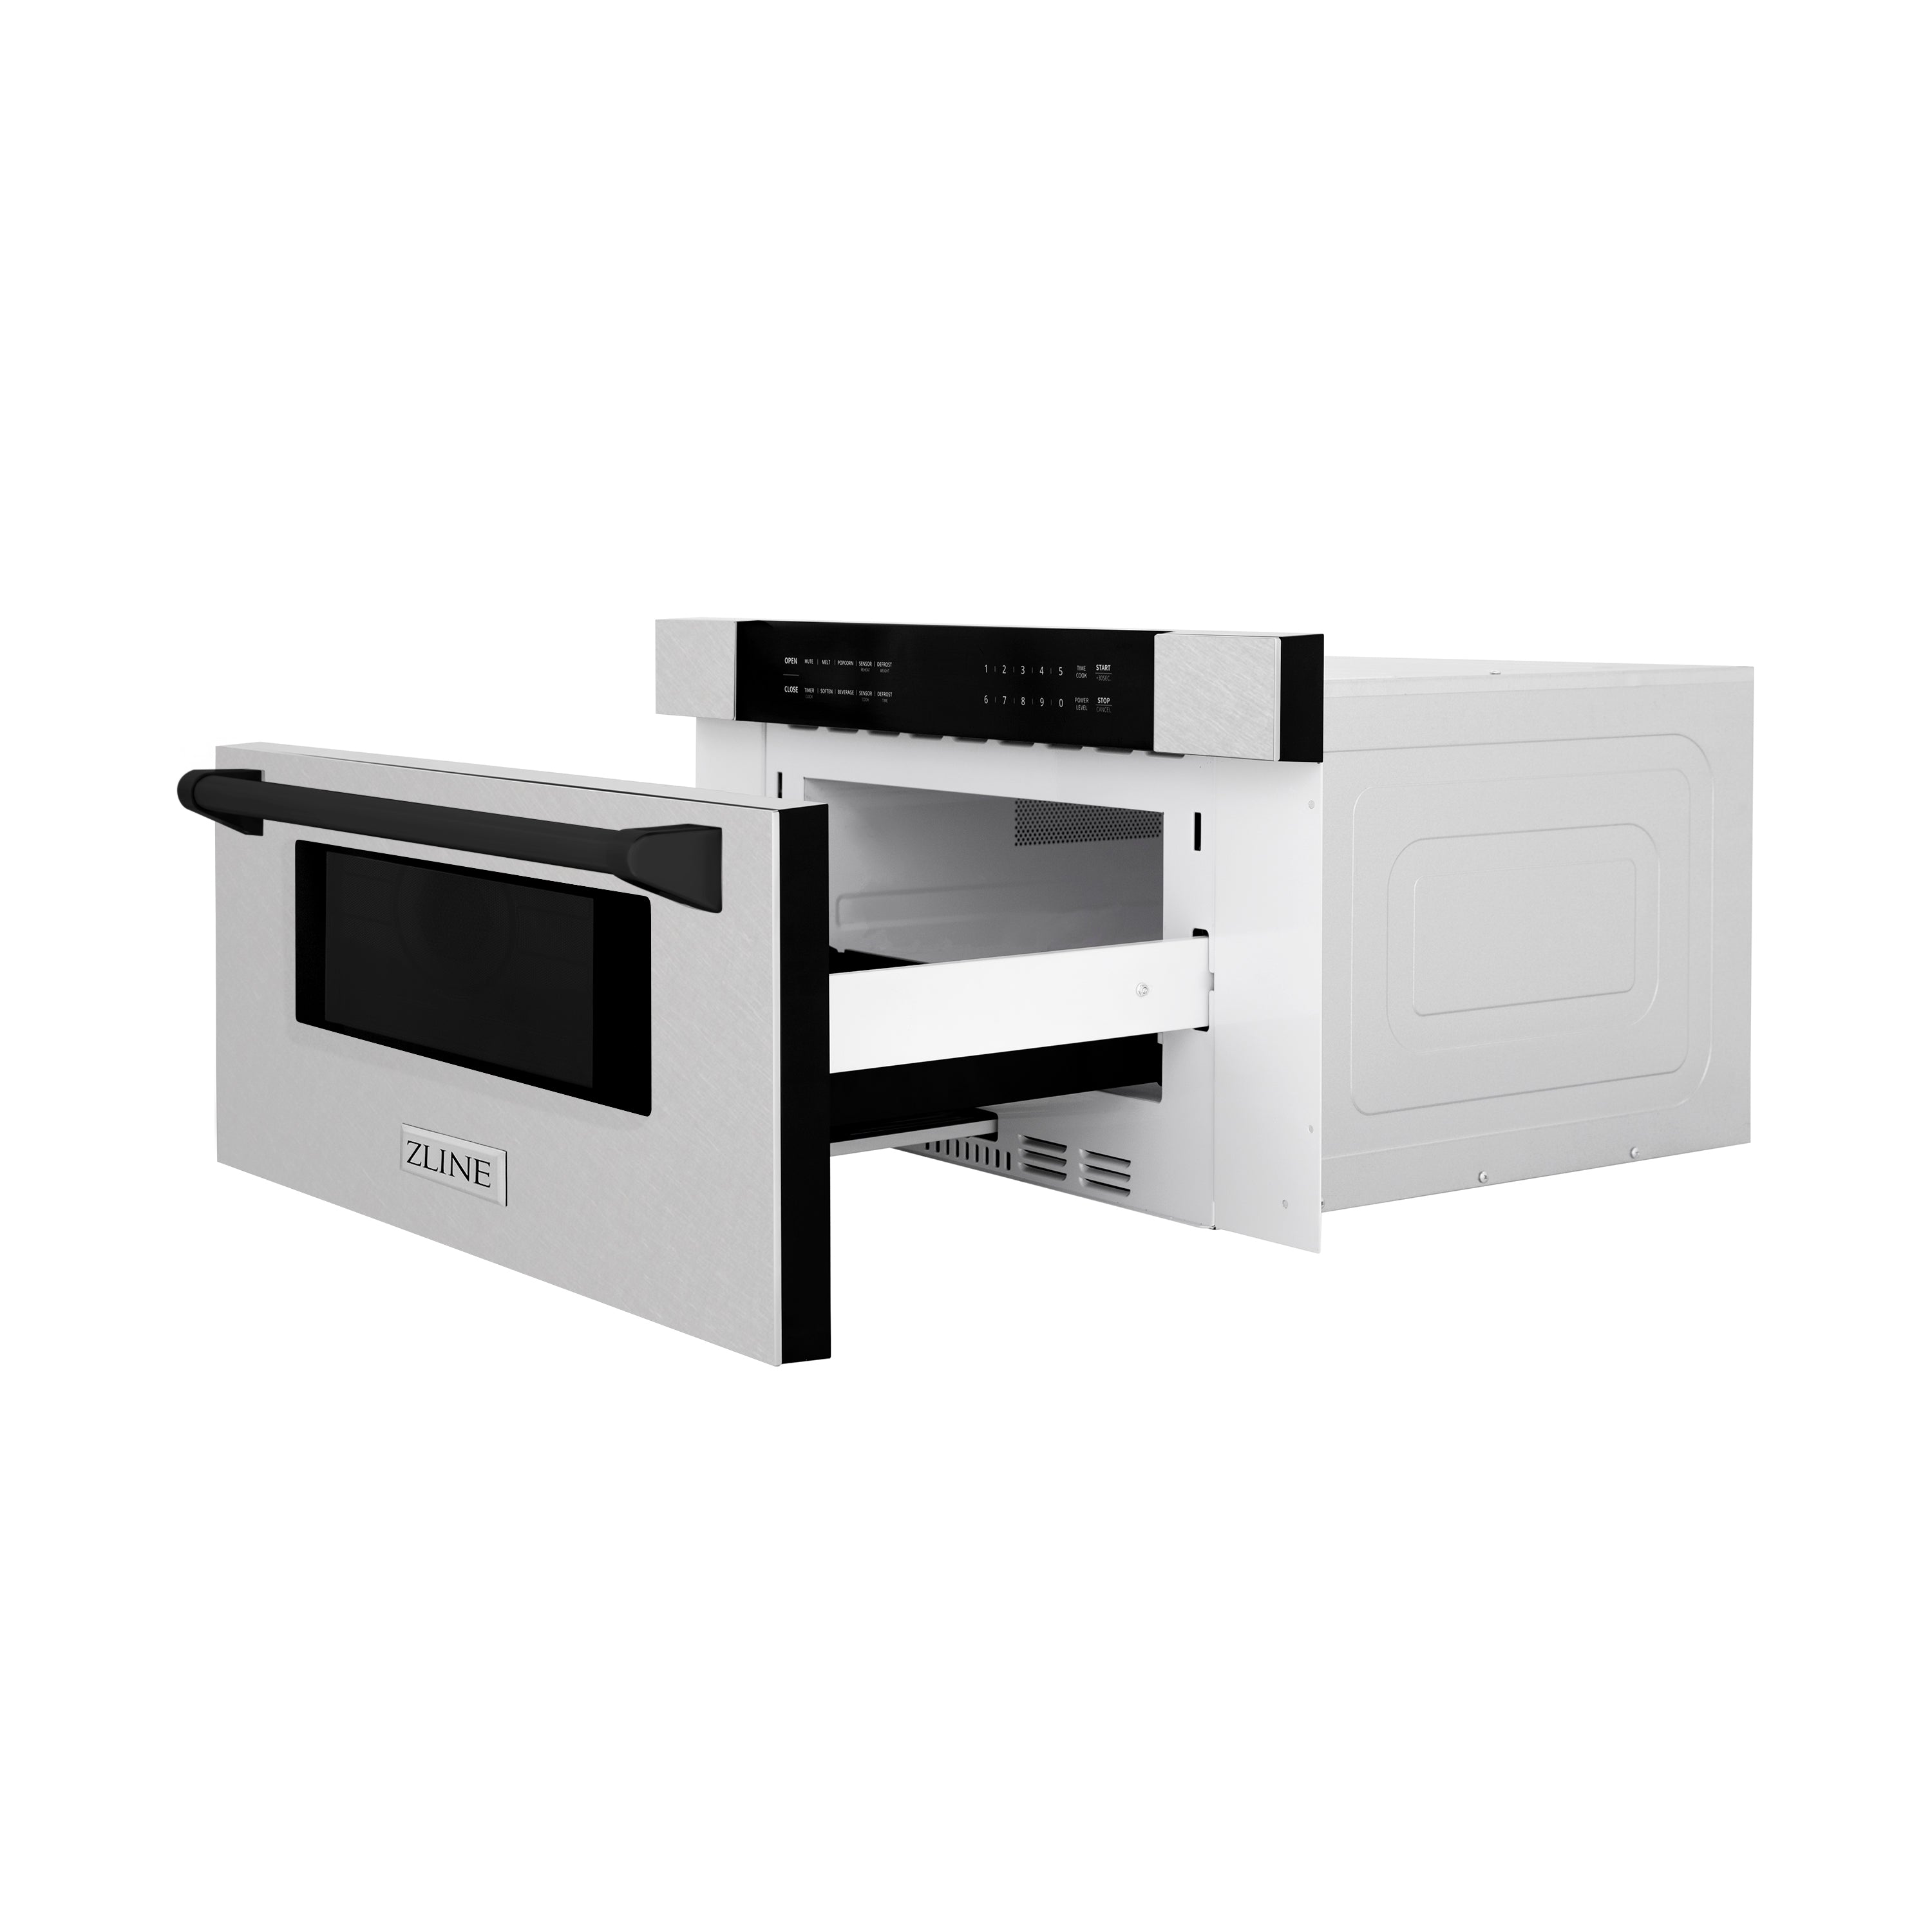 ZLINE Autograph Edition 30 in. 1.2 cu. ft. Built-In Microwave Drawer in Fingerprint Resistant Stainless Steel with Matte Black Accents (MWDZ-30-SS-MB) Side View Drawer Open